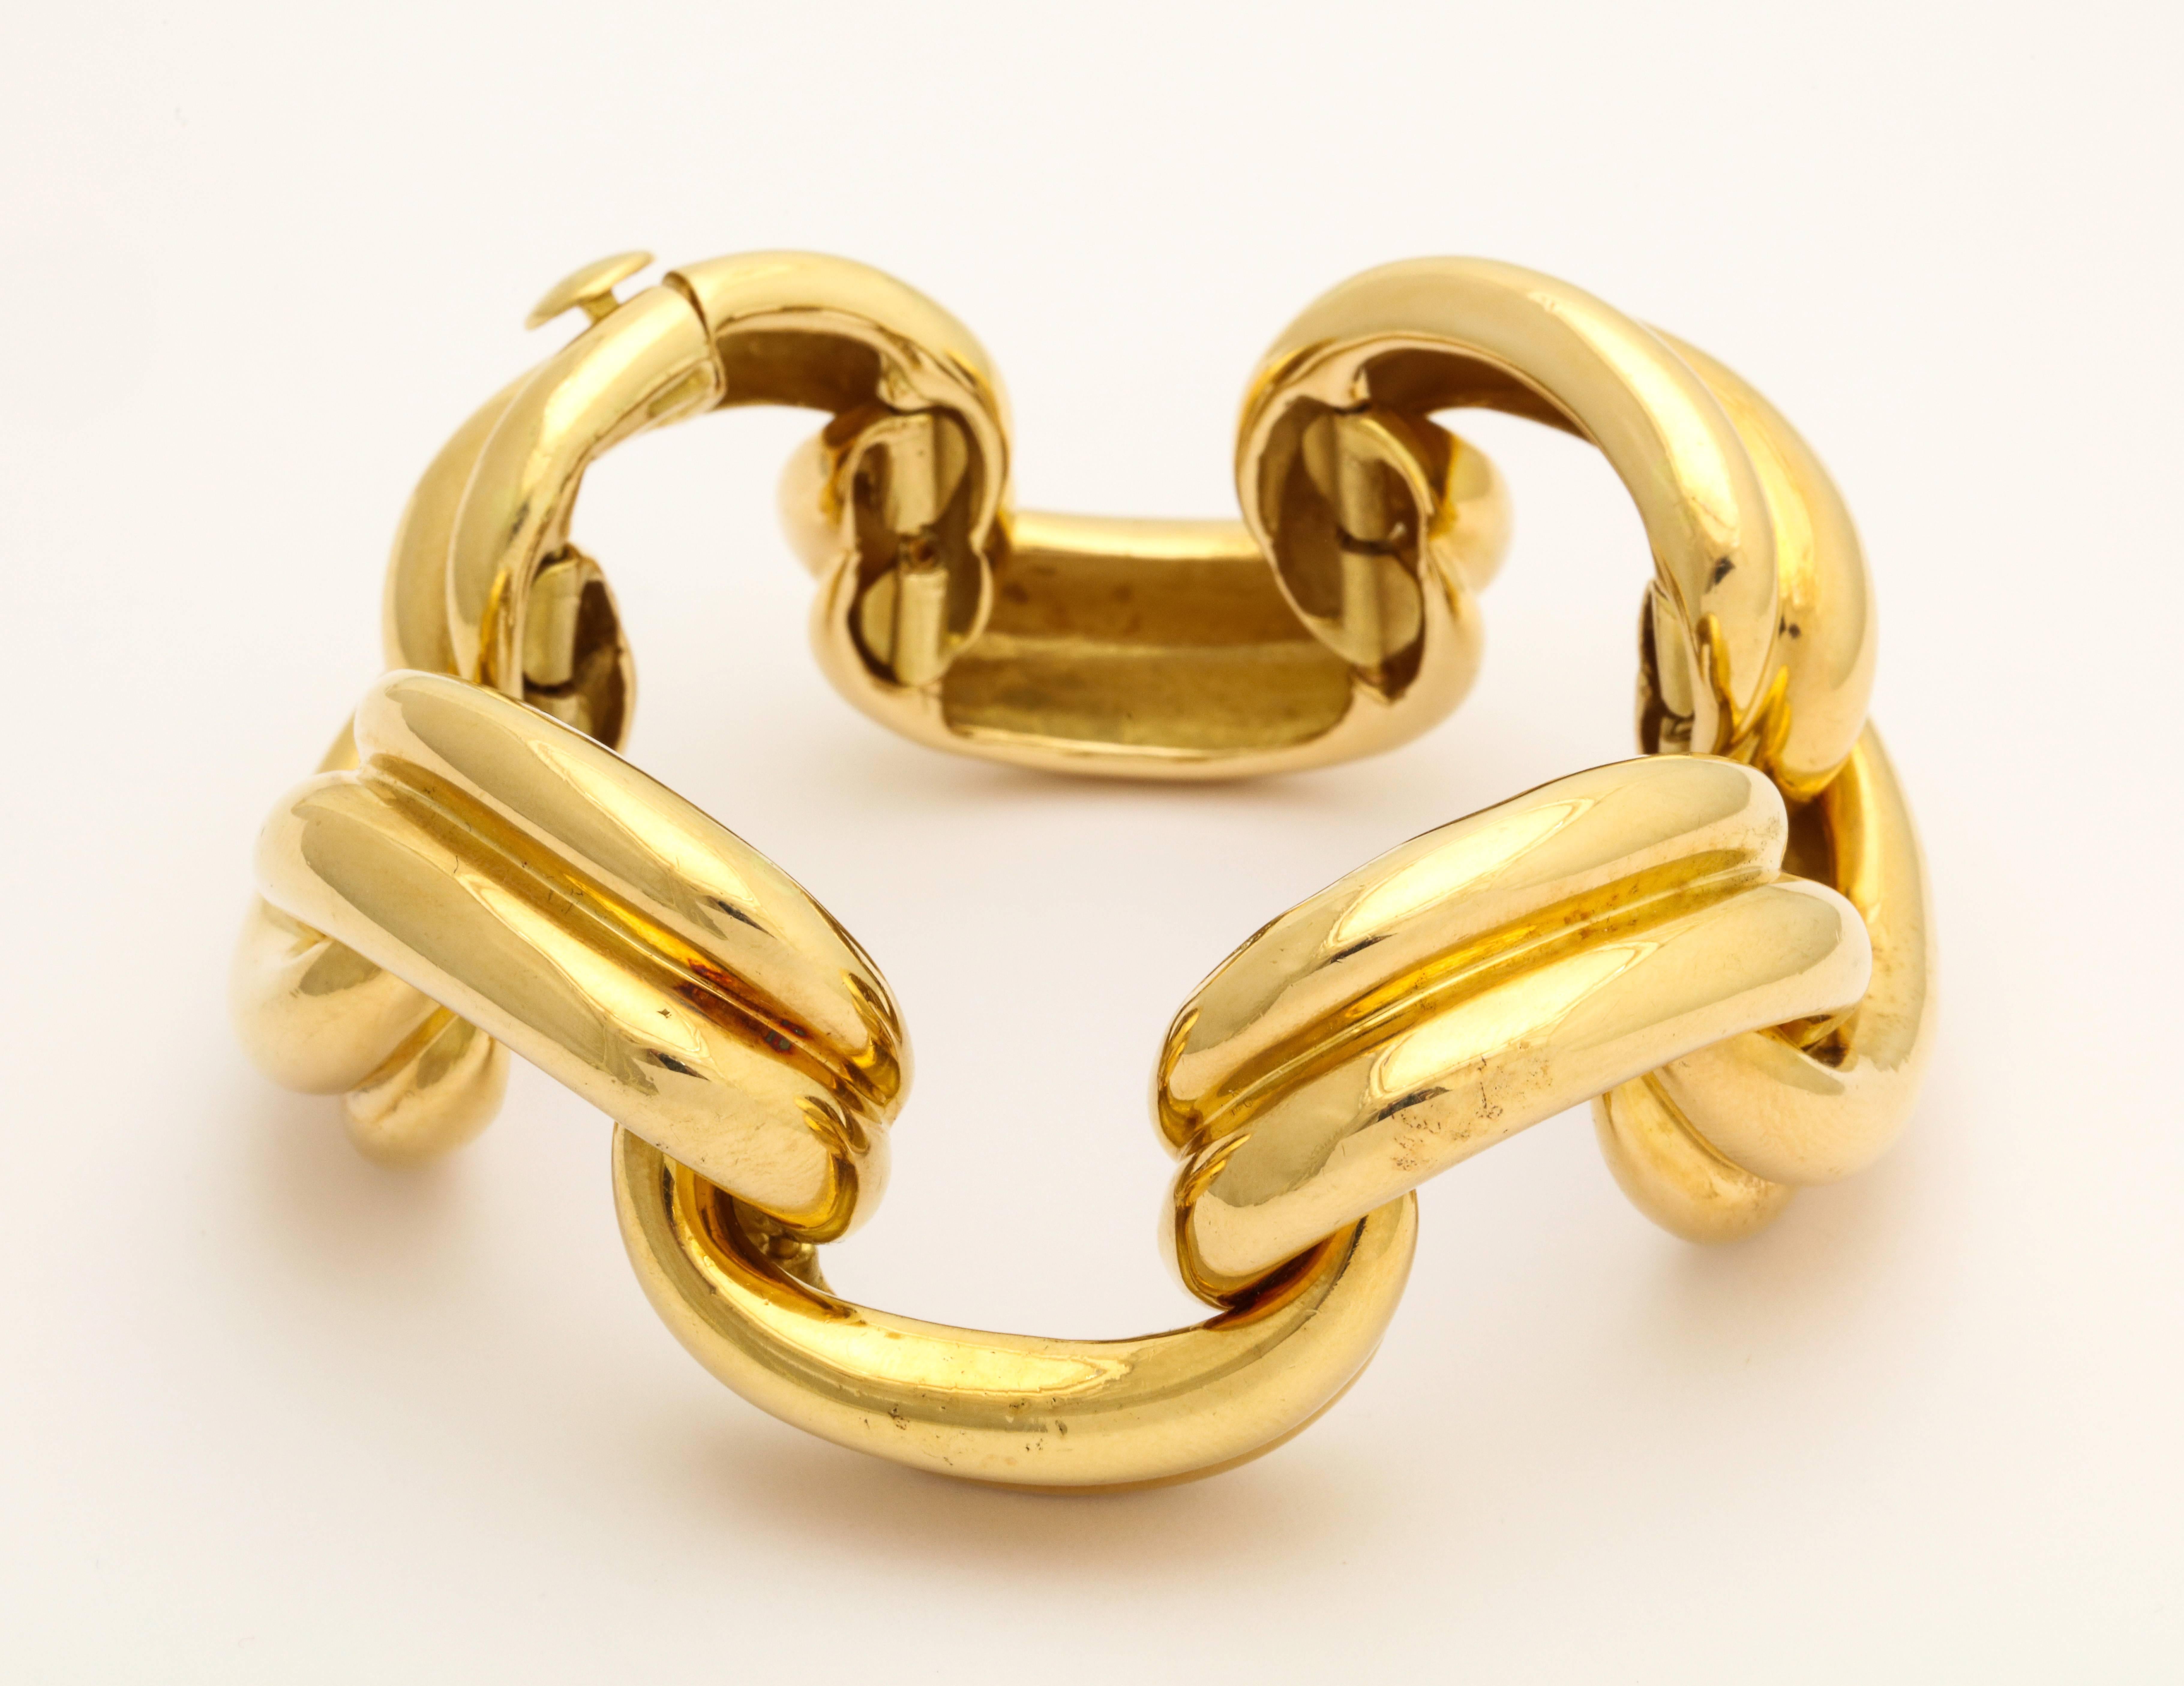 Perfectly elegant, this vintage Craiger Drake 18K gold bracelet wraps the wrist in a 3-dimensional series of alternating draped ribbon swags, each enhanced with a touch of pale brown enamel in the recess enhancing the total effect. Drakes designs